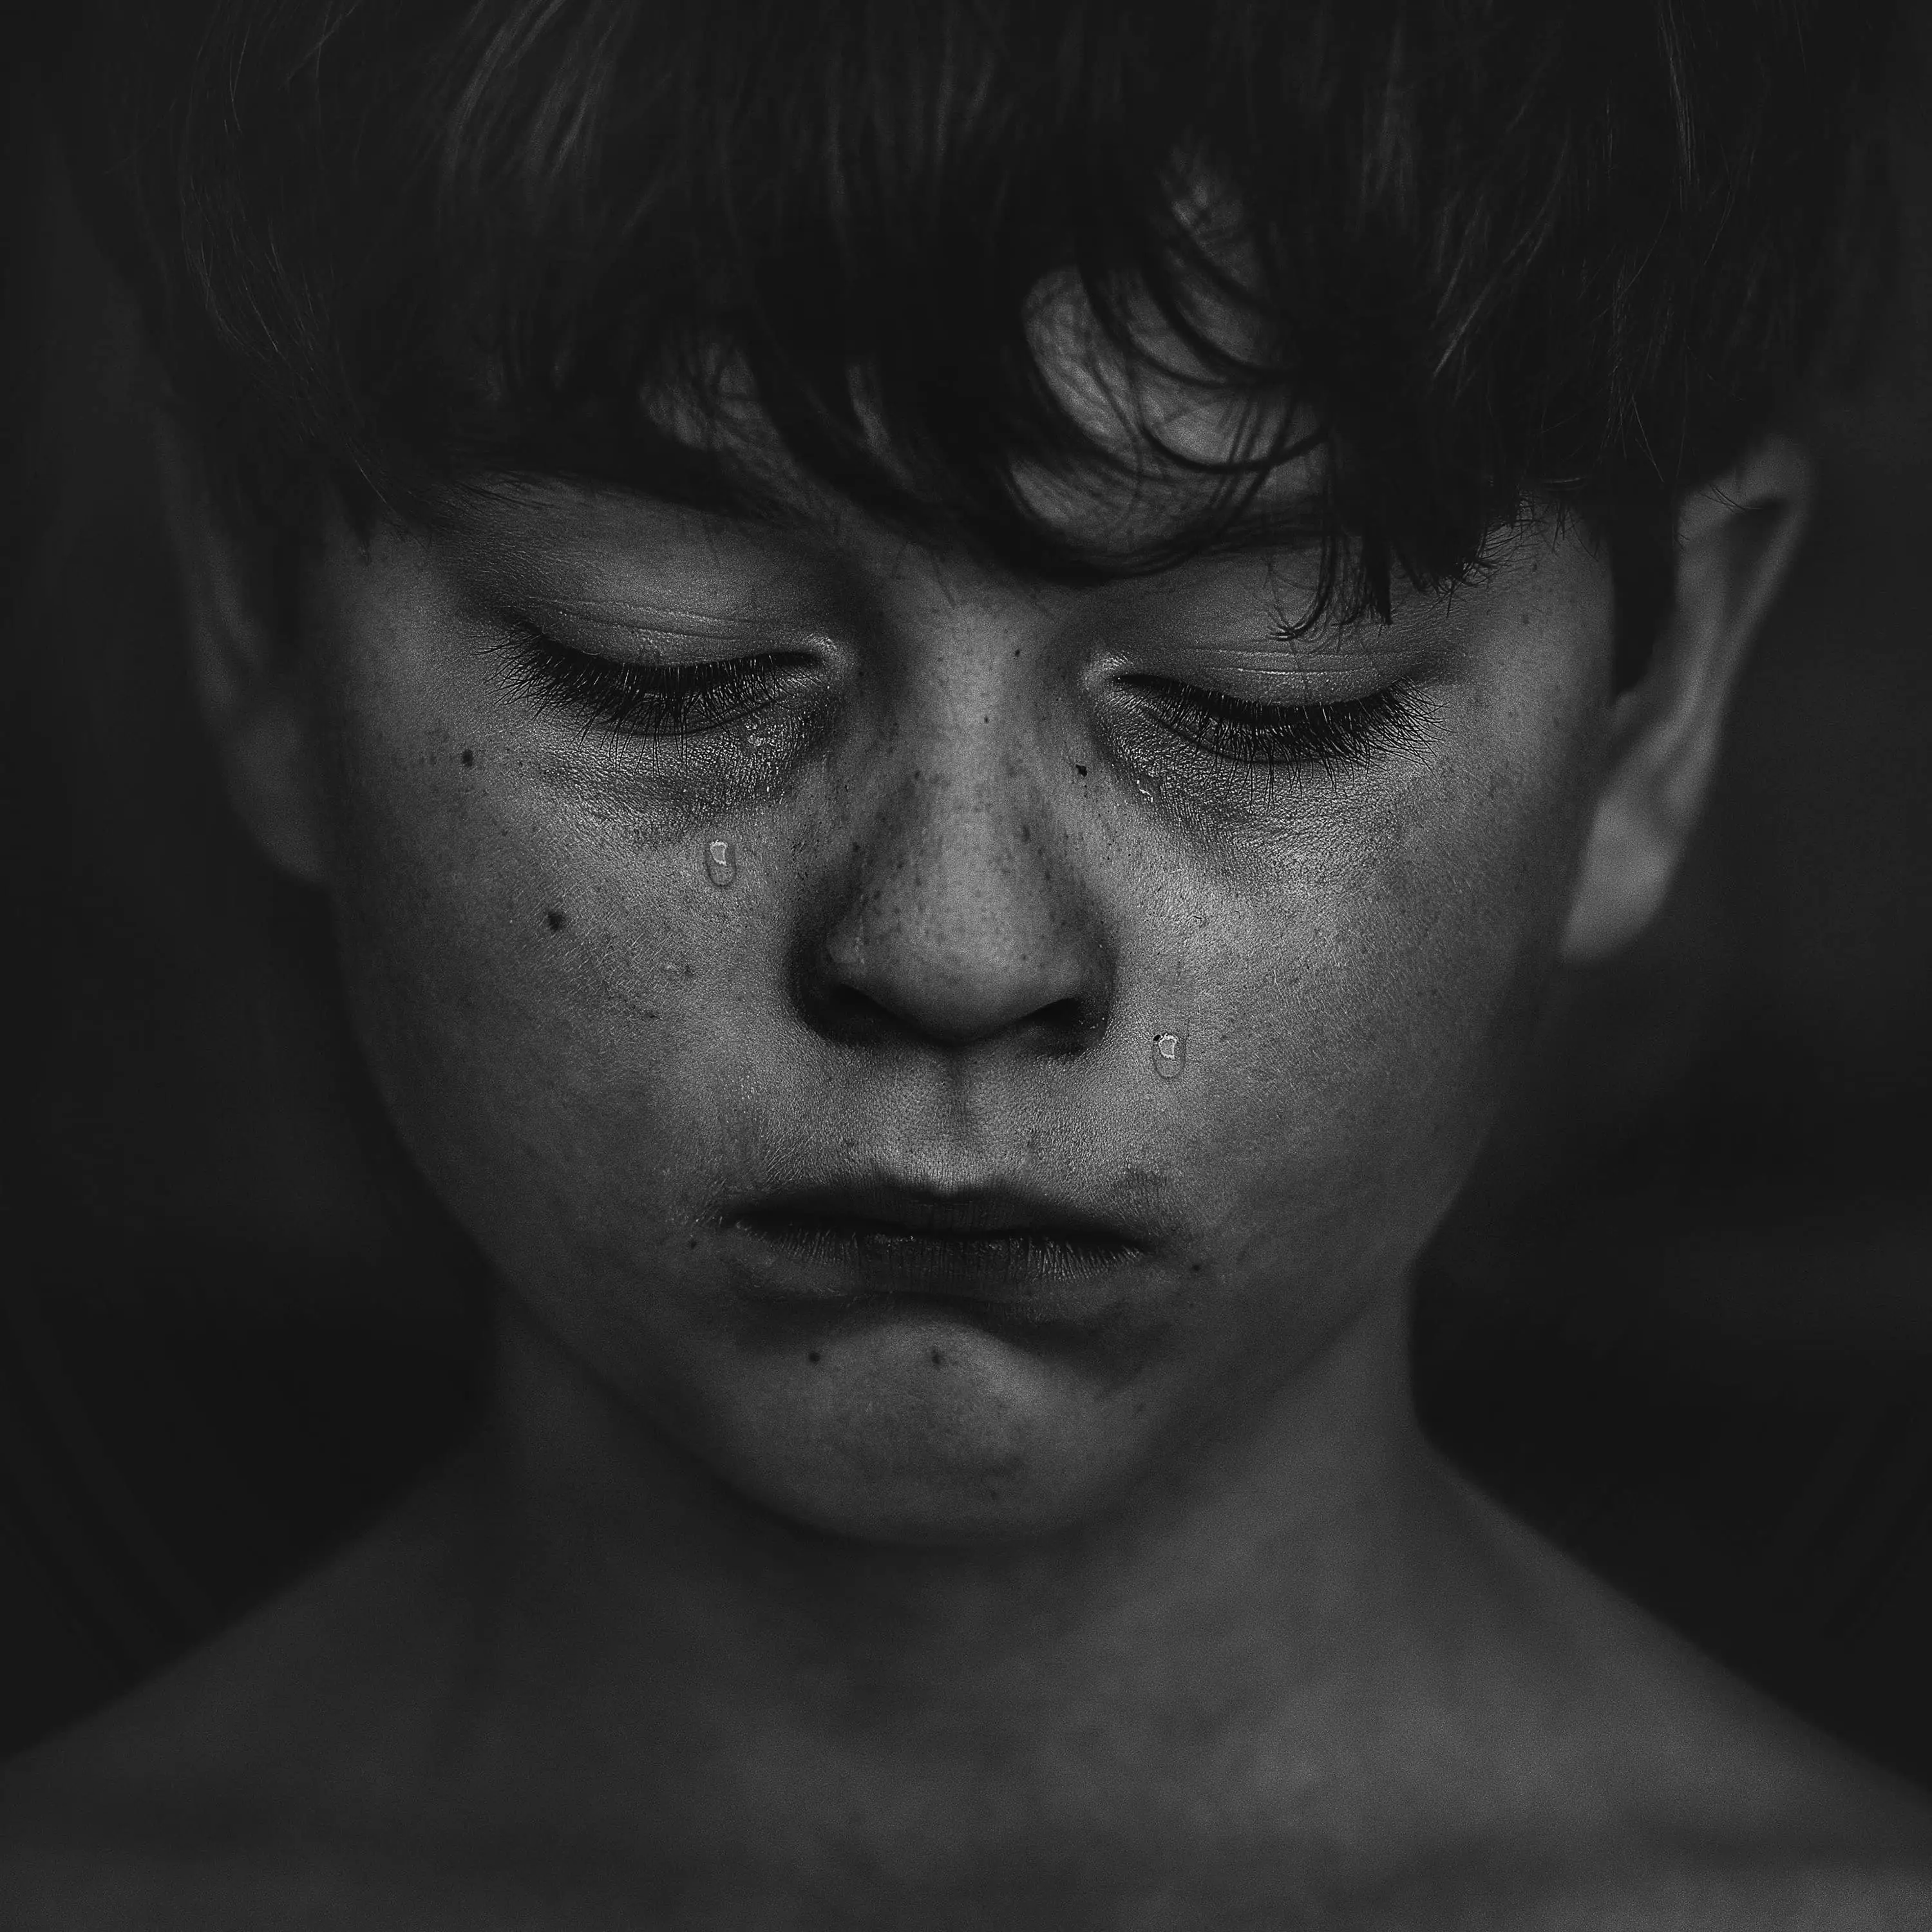 crying boy with depression and sadness